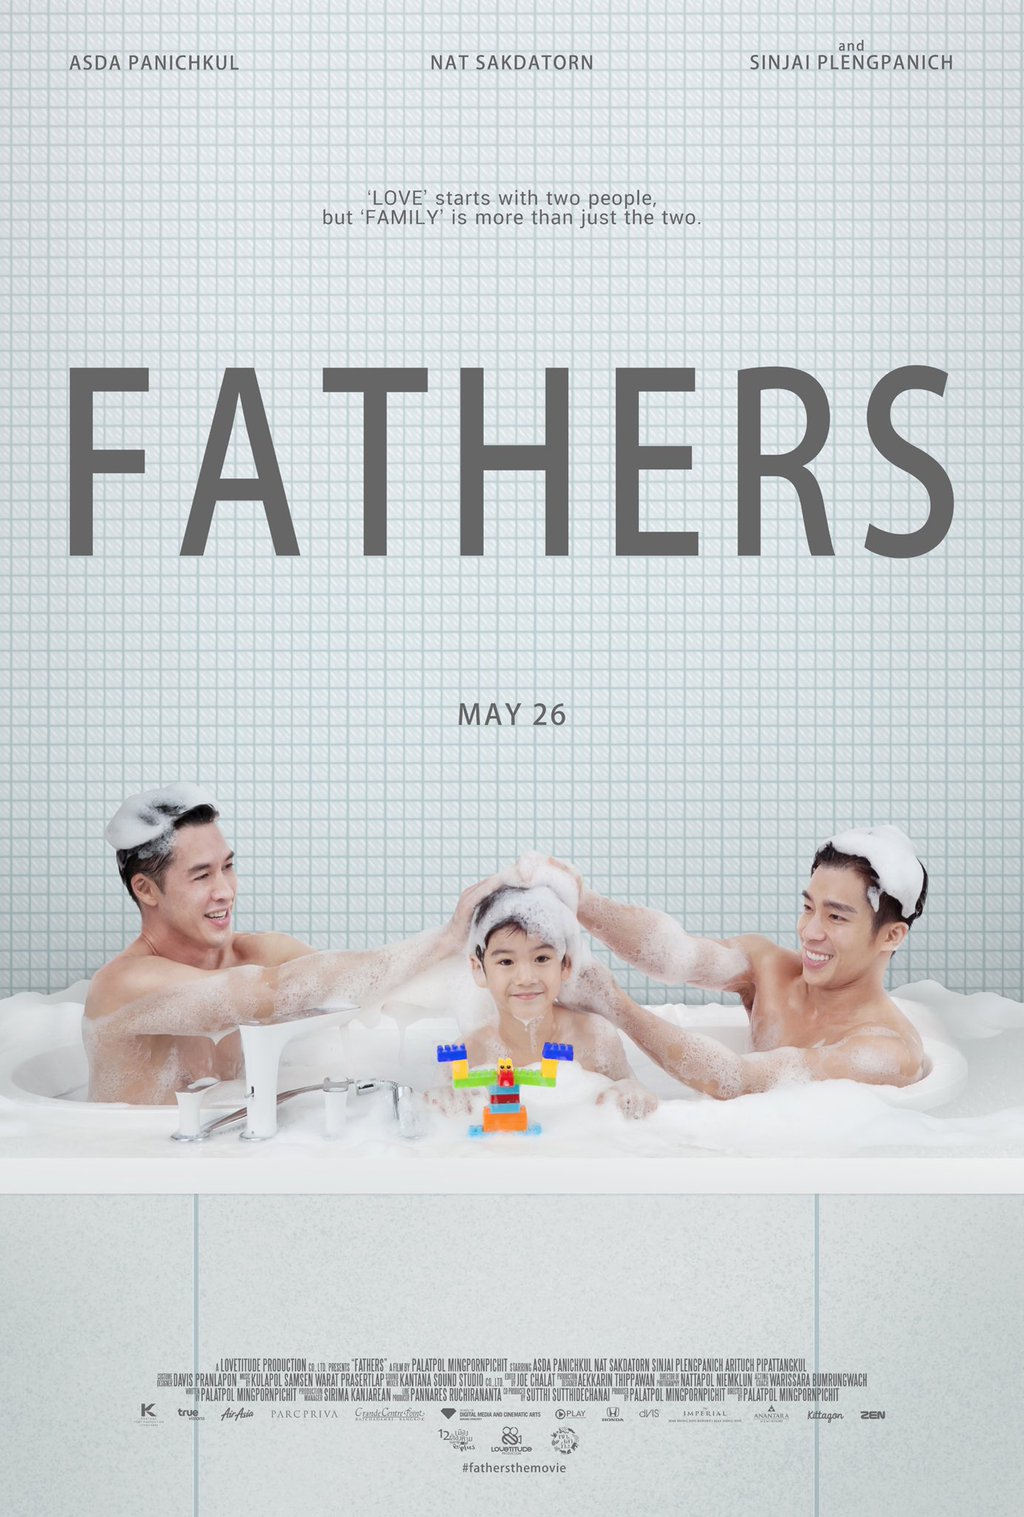 Fathers - series boys love